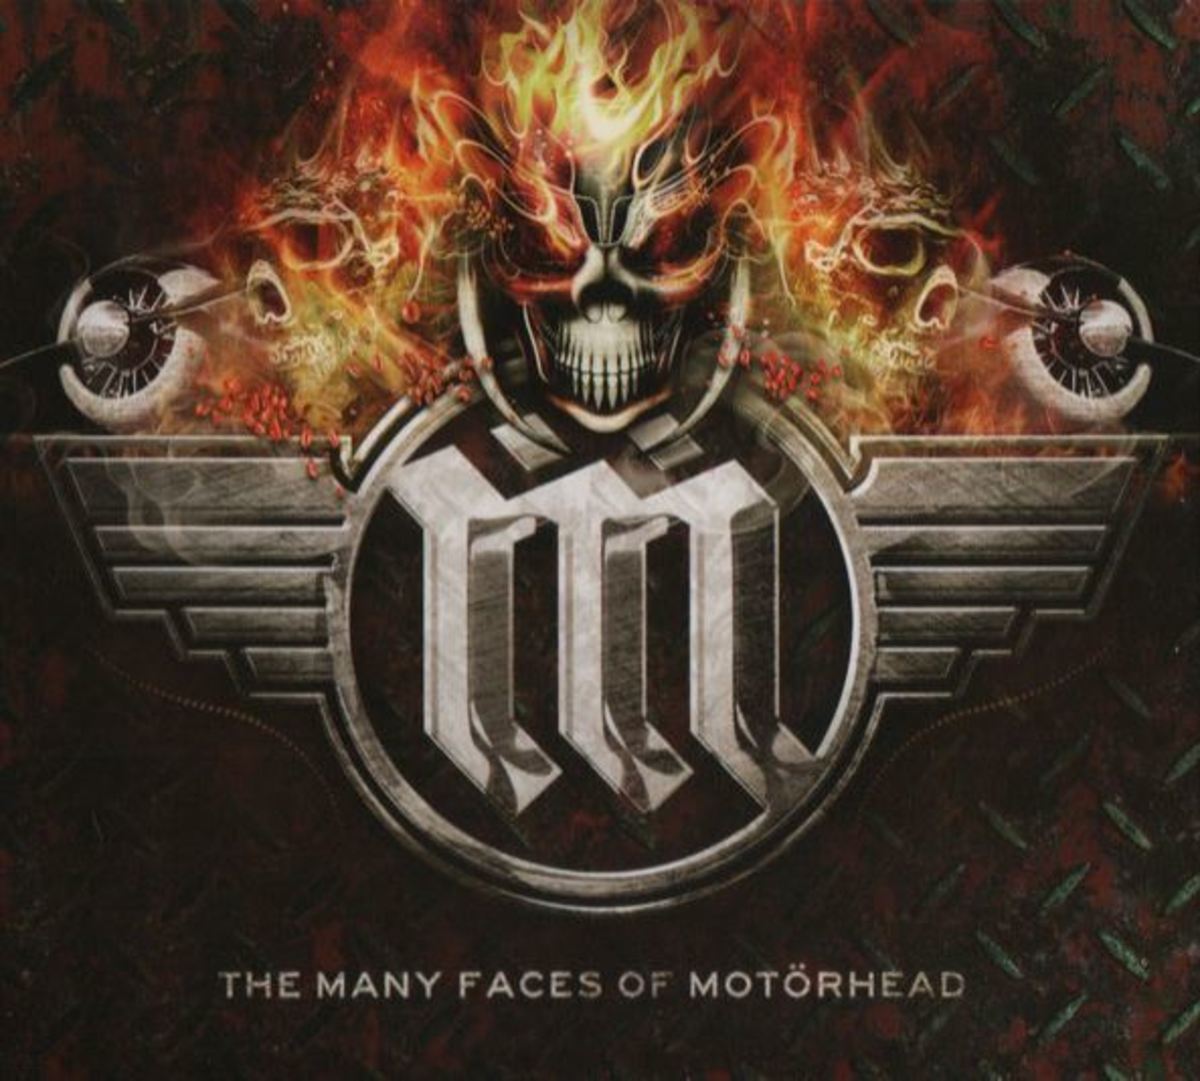 the-many-faces-of-motrhead-album-review